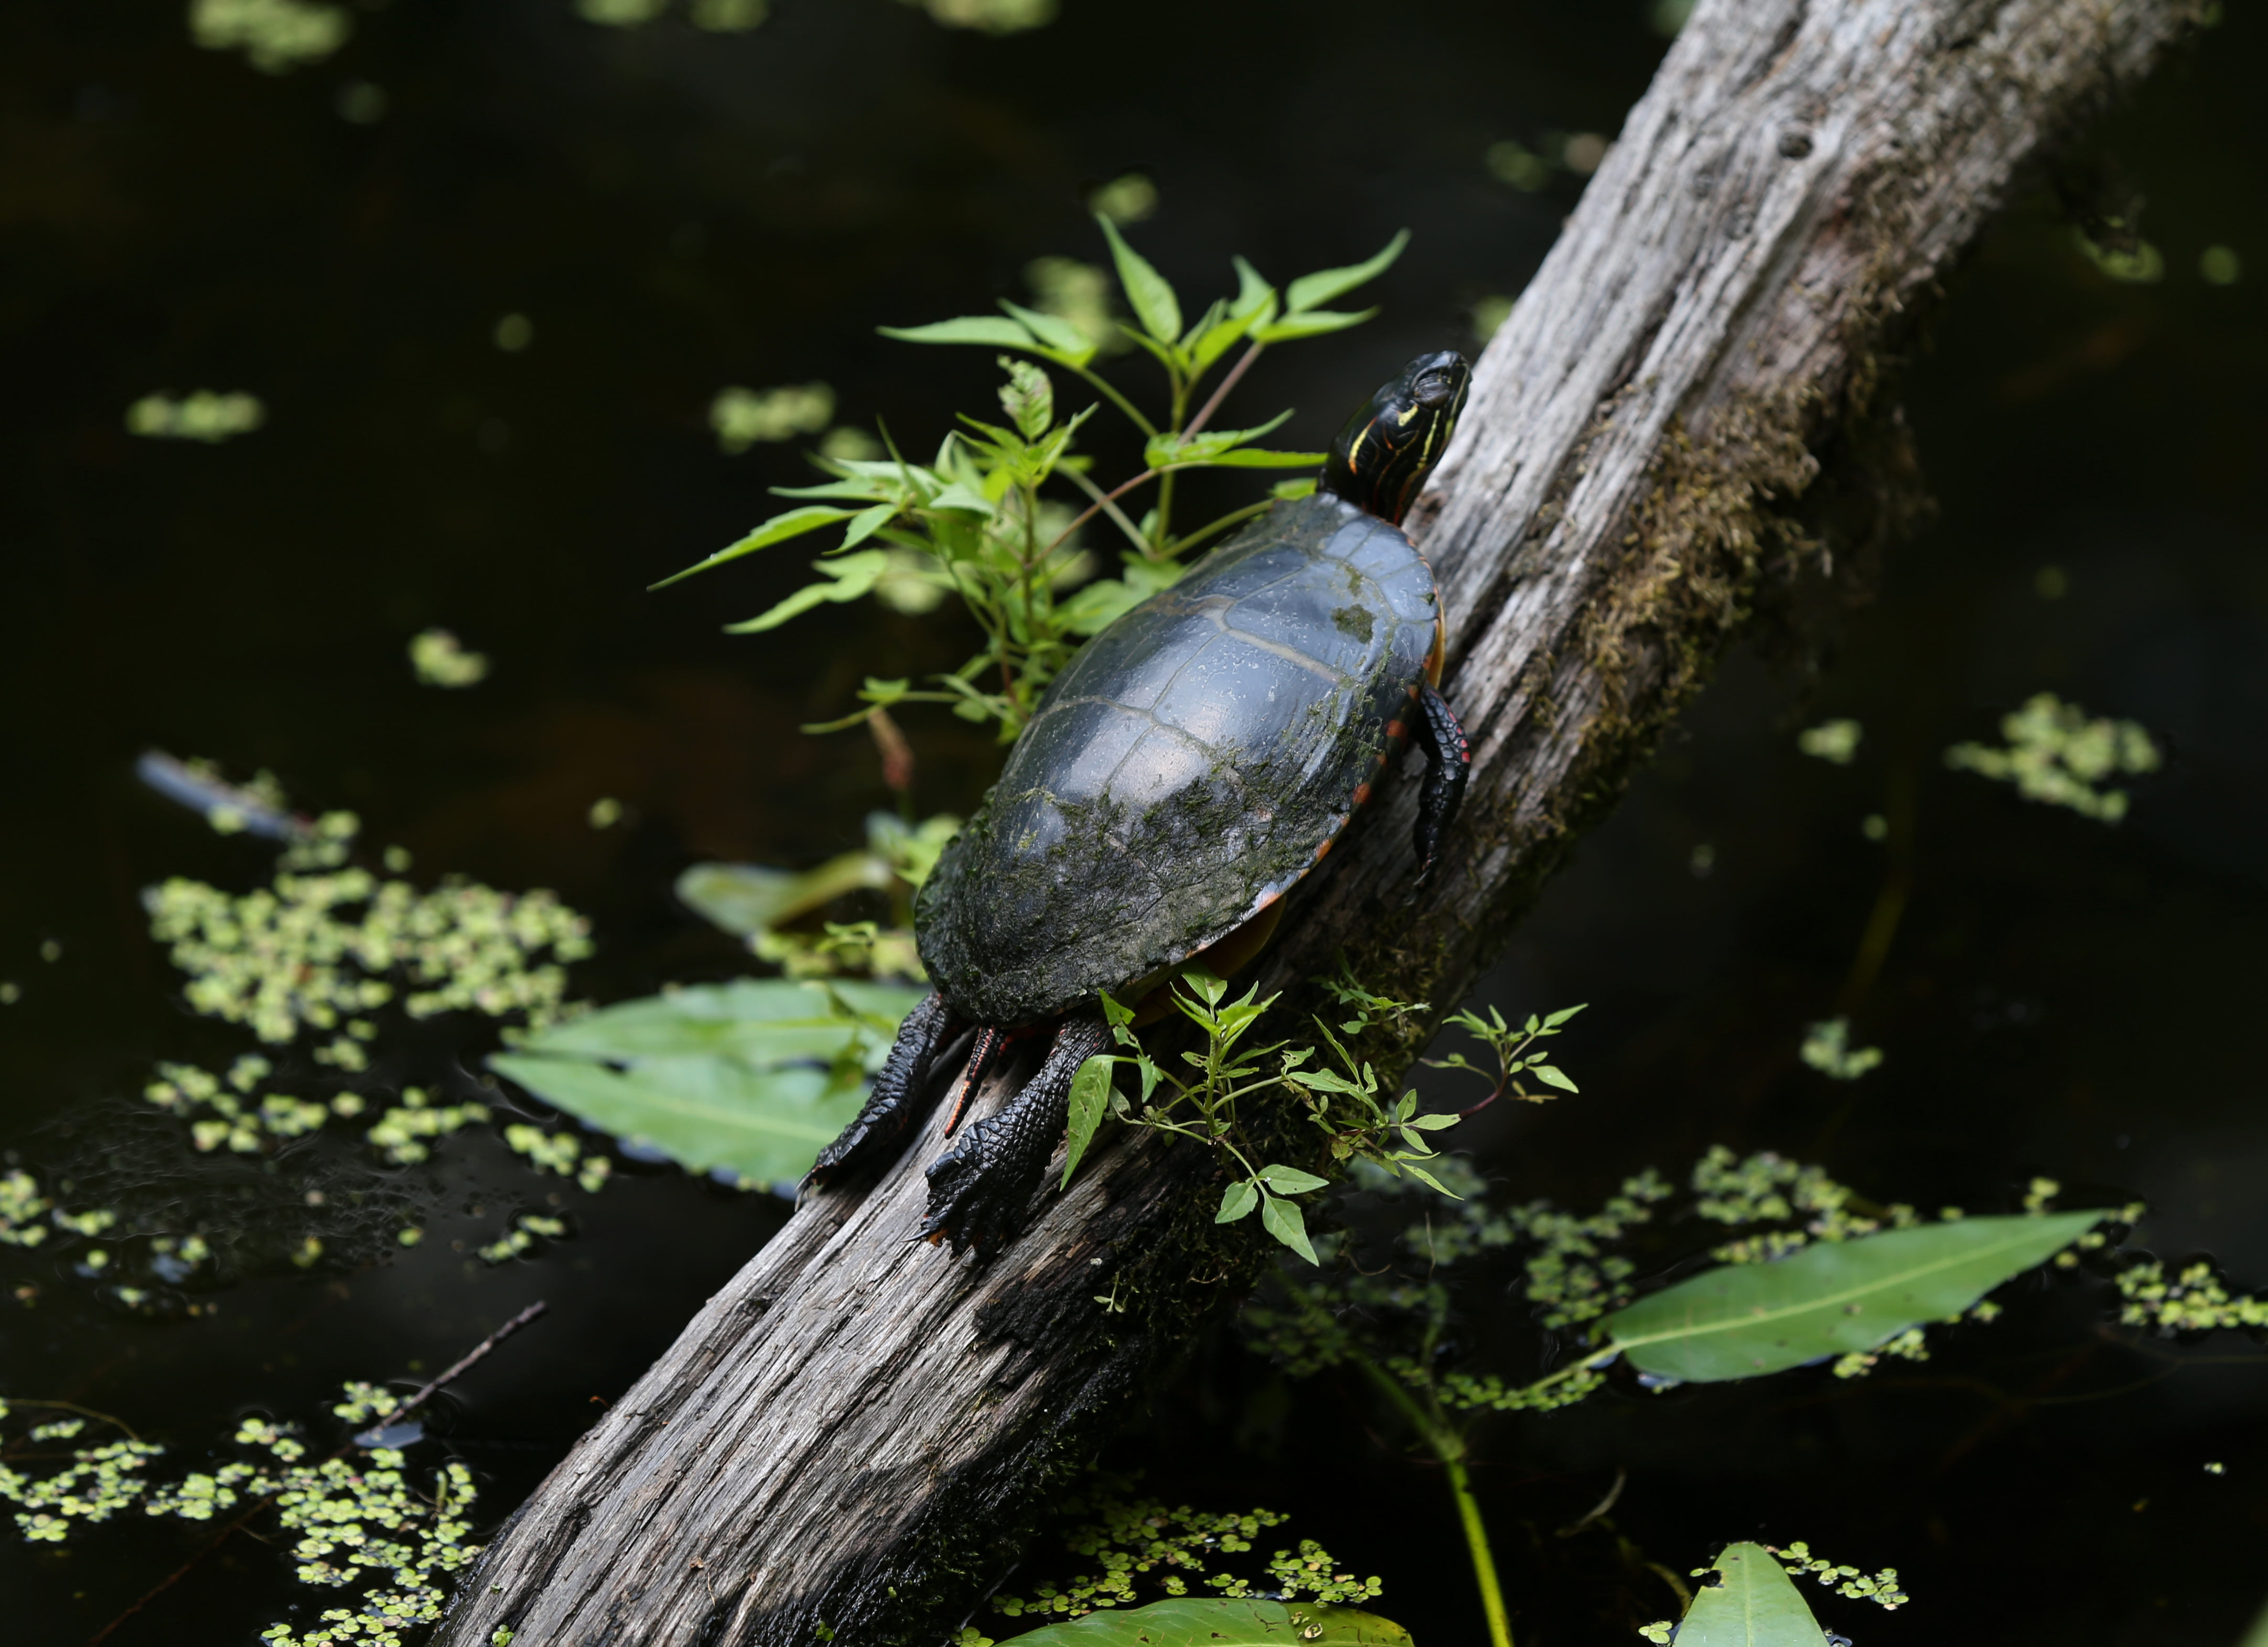 A turtle in the garden in the forest. 